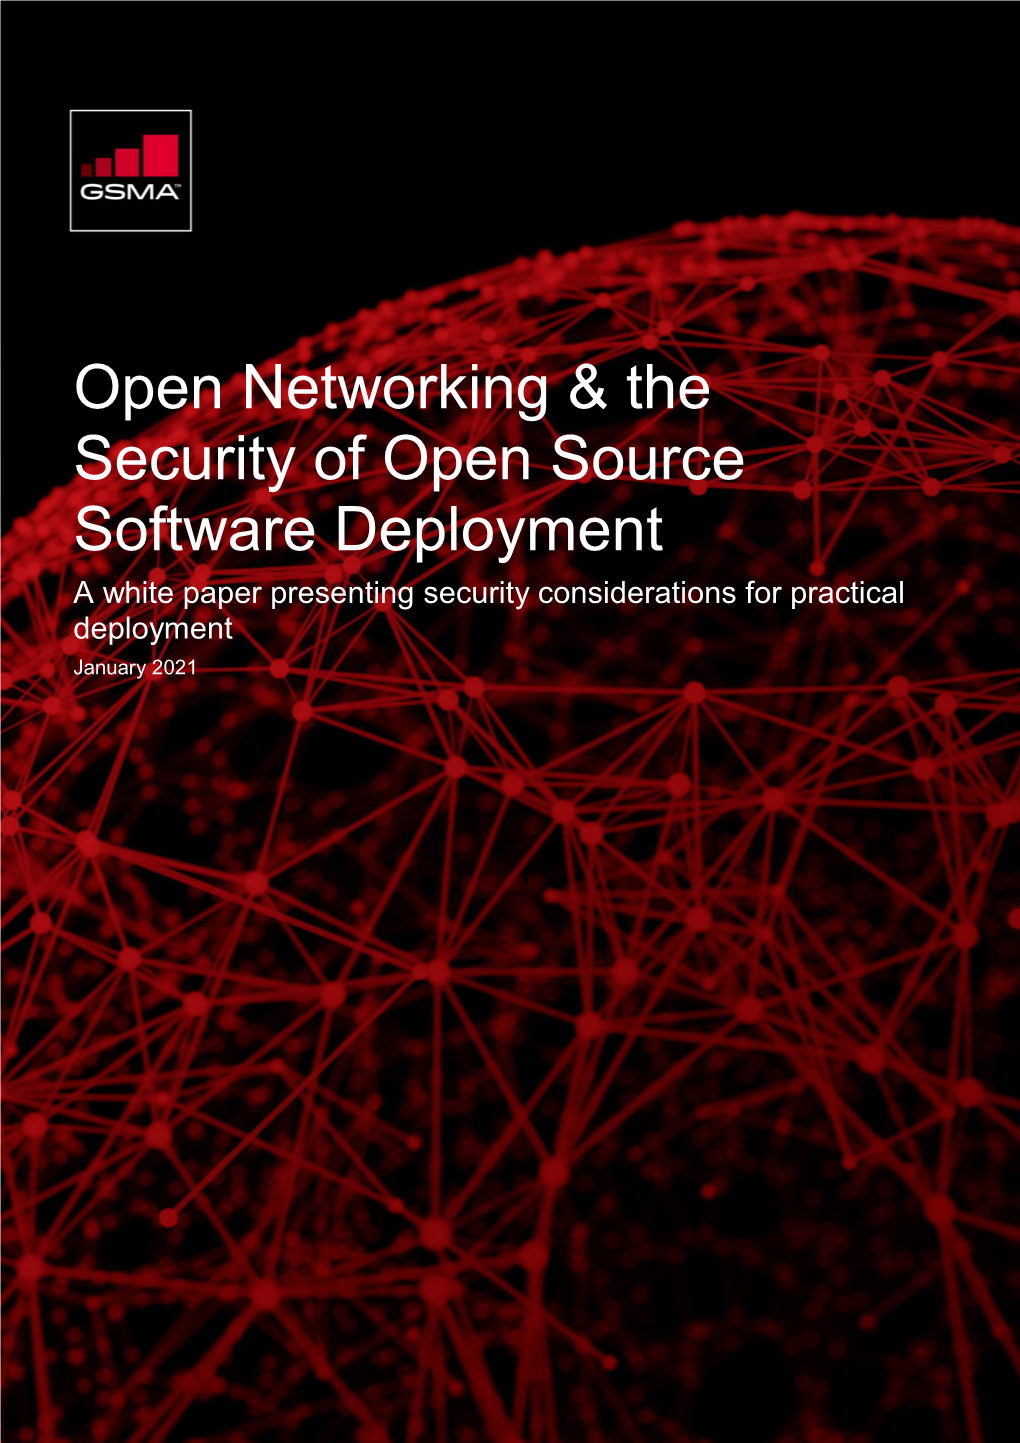 Open Networking & the Security of Open Source Software Deployment